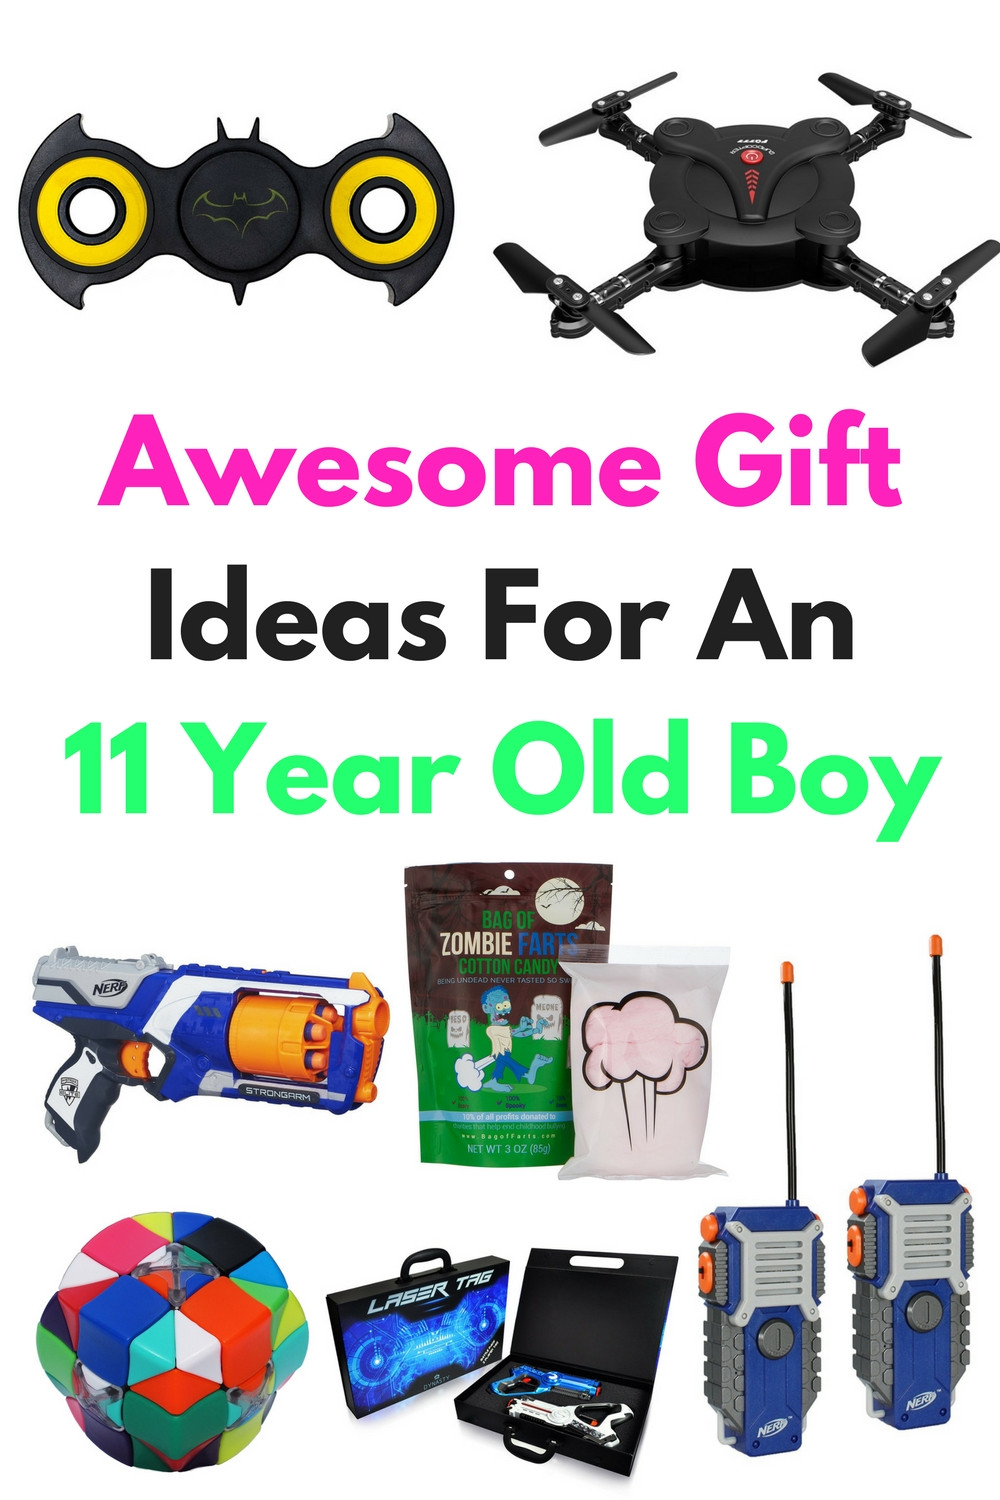 Birthday Gift Ideas For 11 Year Old Boy
 Awesome Gift Ideas For An 11 Year Old Boy